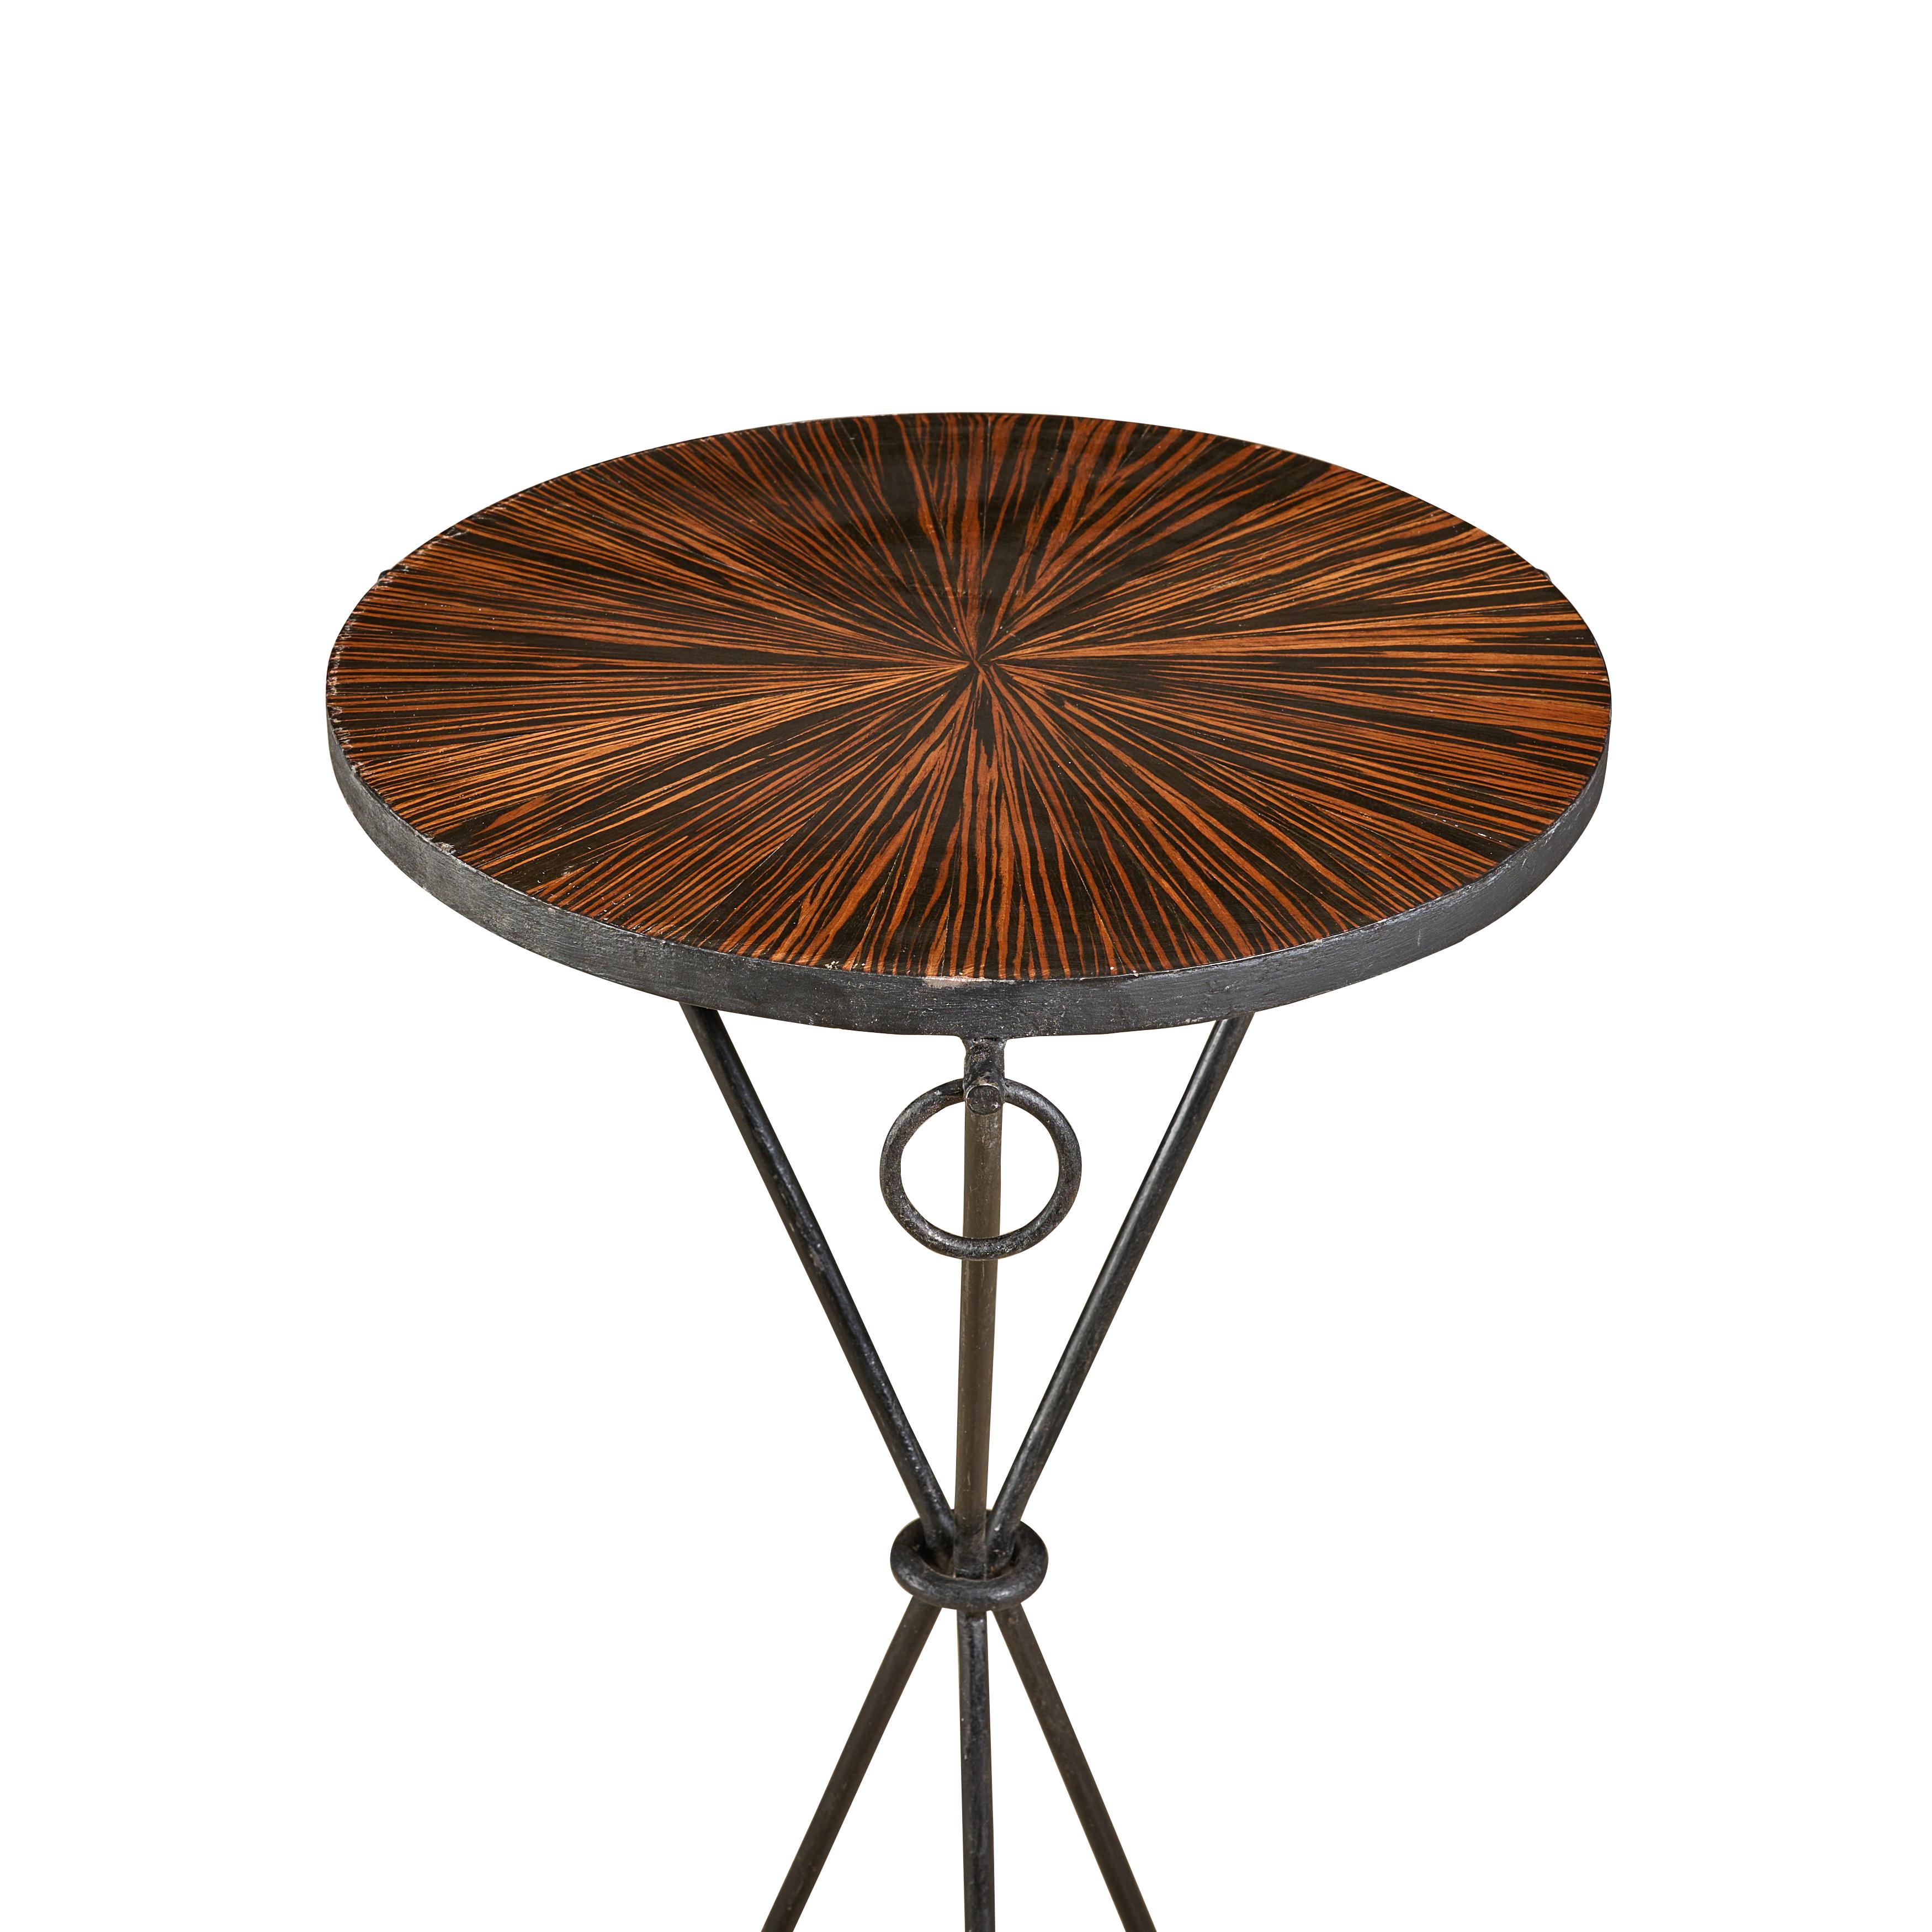 Replica Jean-Michel Frank side table. Great design and quality.

